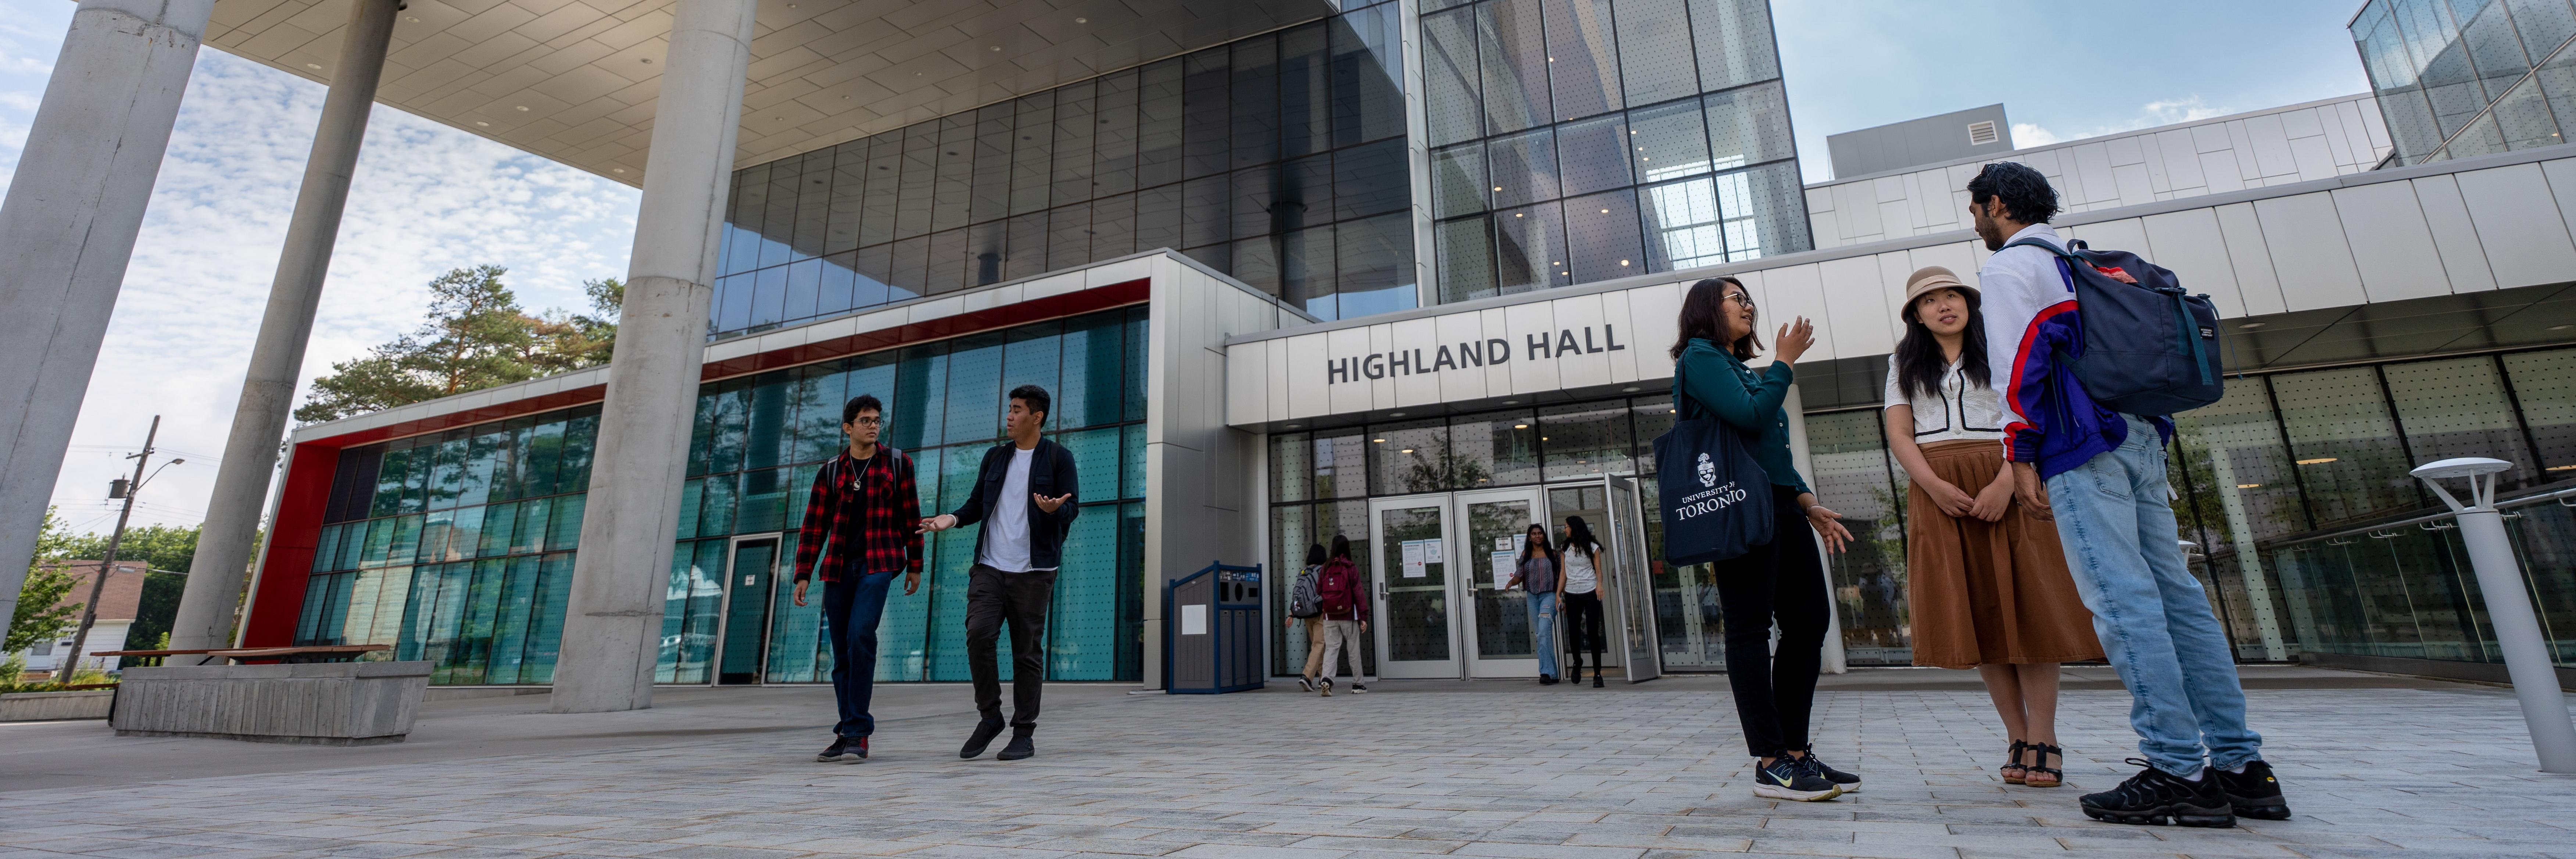 Students standing outdoors in front of Highland Hall